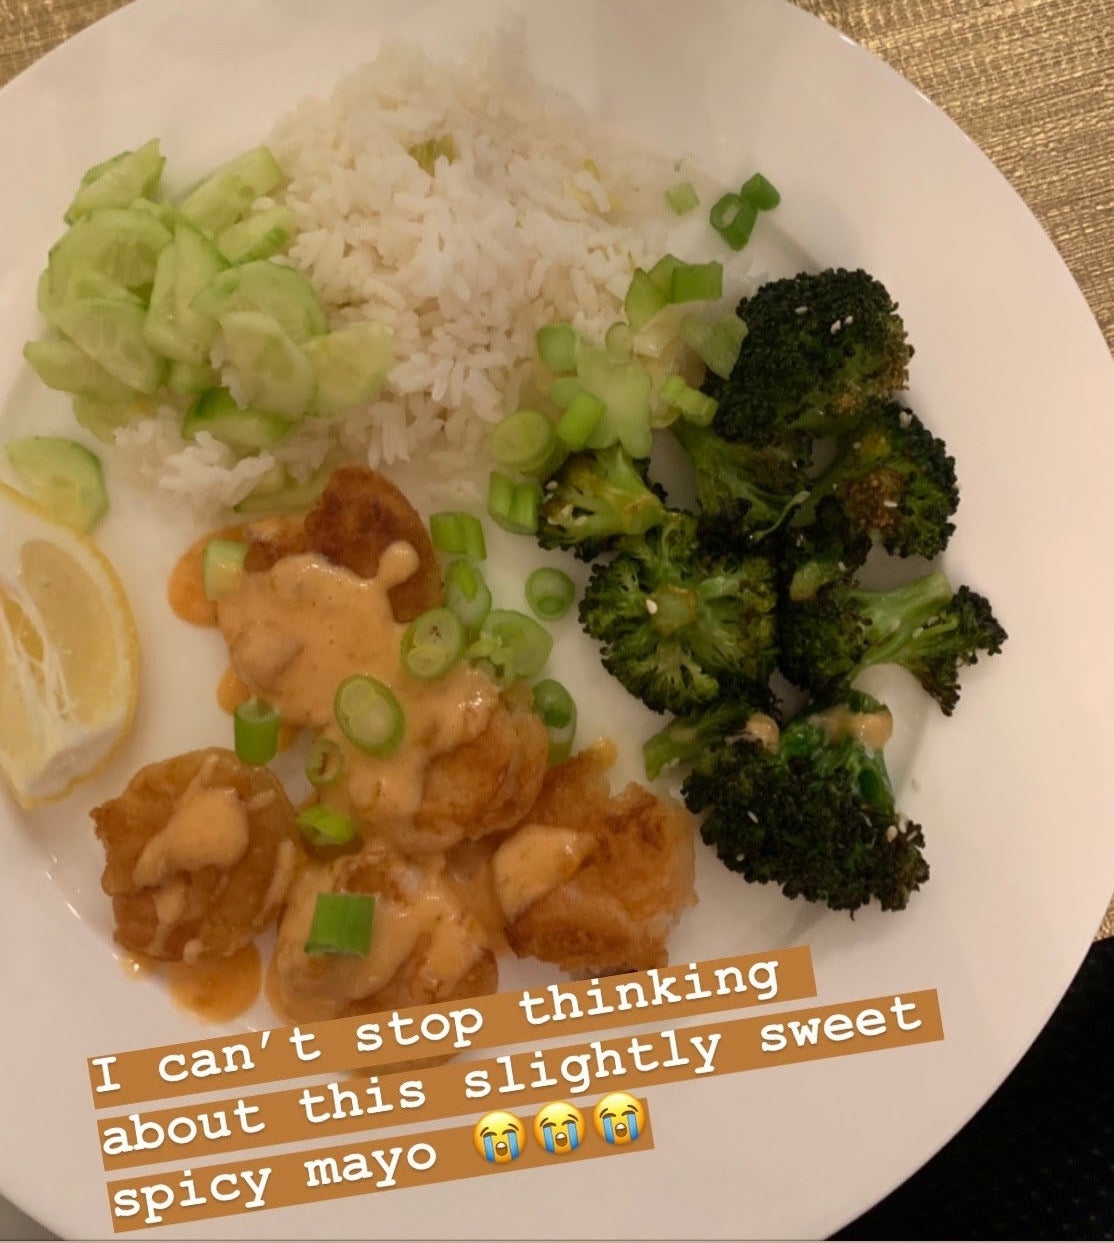 buzzfeed editor&#x27;s plate of broccoli, rice, and shrimp with sauce captioned &quot;I can&#x27;t stop thinking about this slightly sweet spicy mayo&quot;